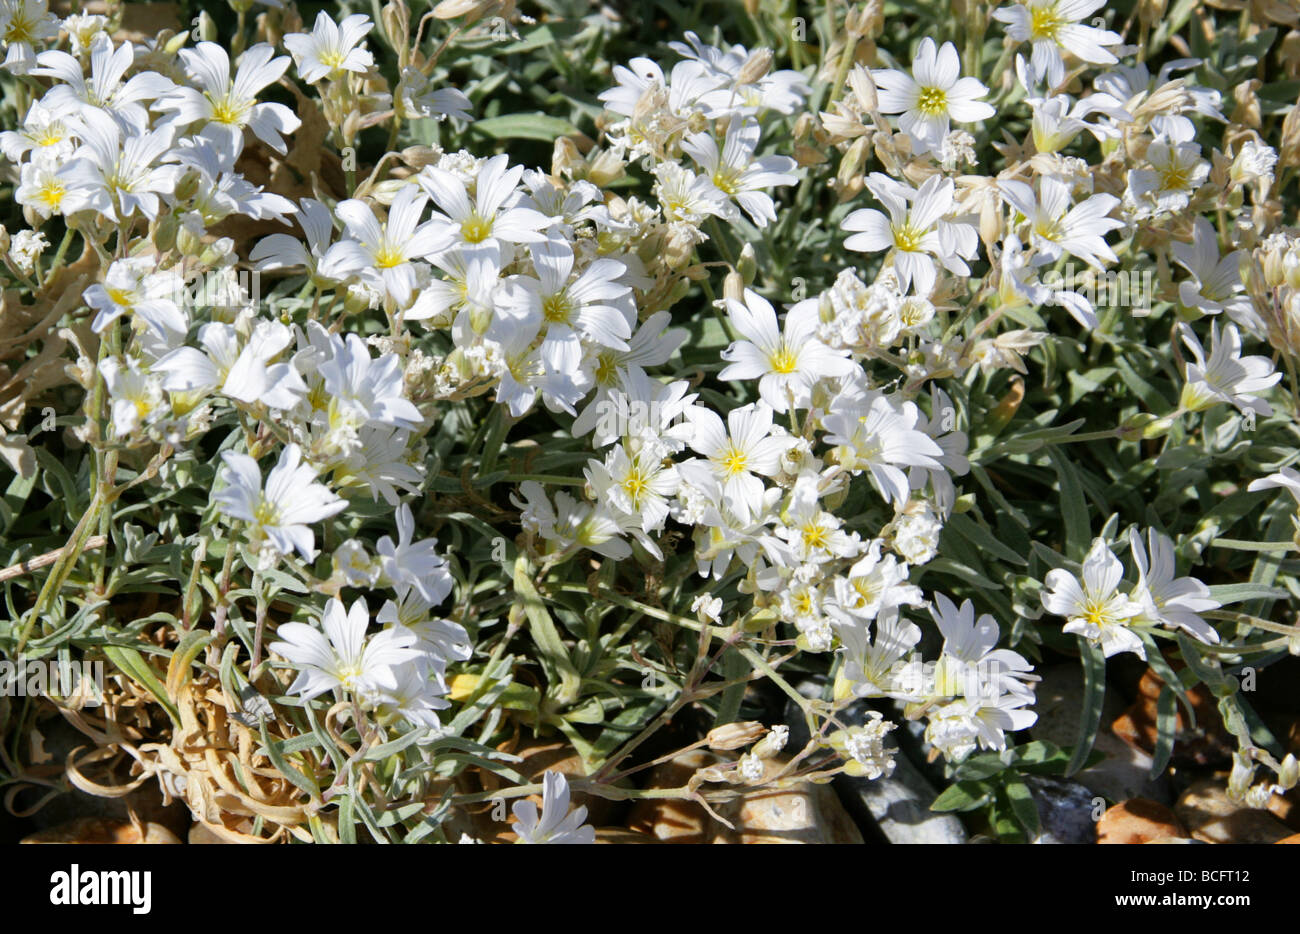 Snow-in-Summer or Dusty Miller, Cerastium tomentosum, Caryophyllaceae, South East Europe Stock Photo